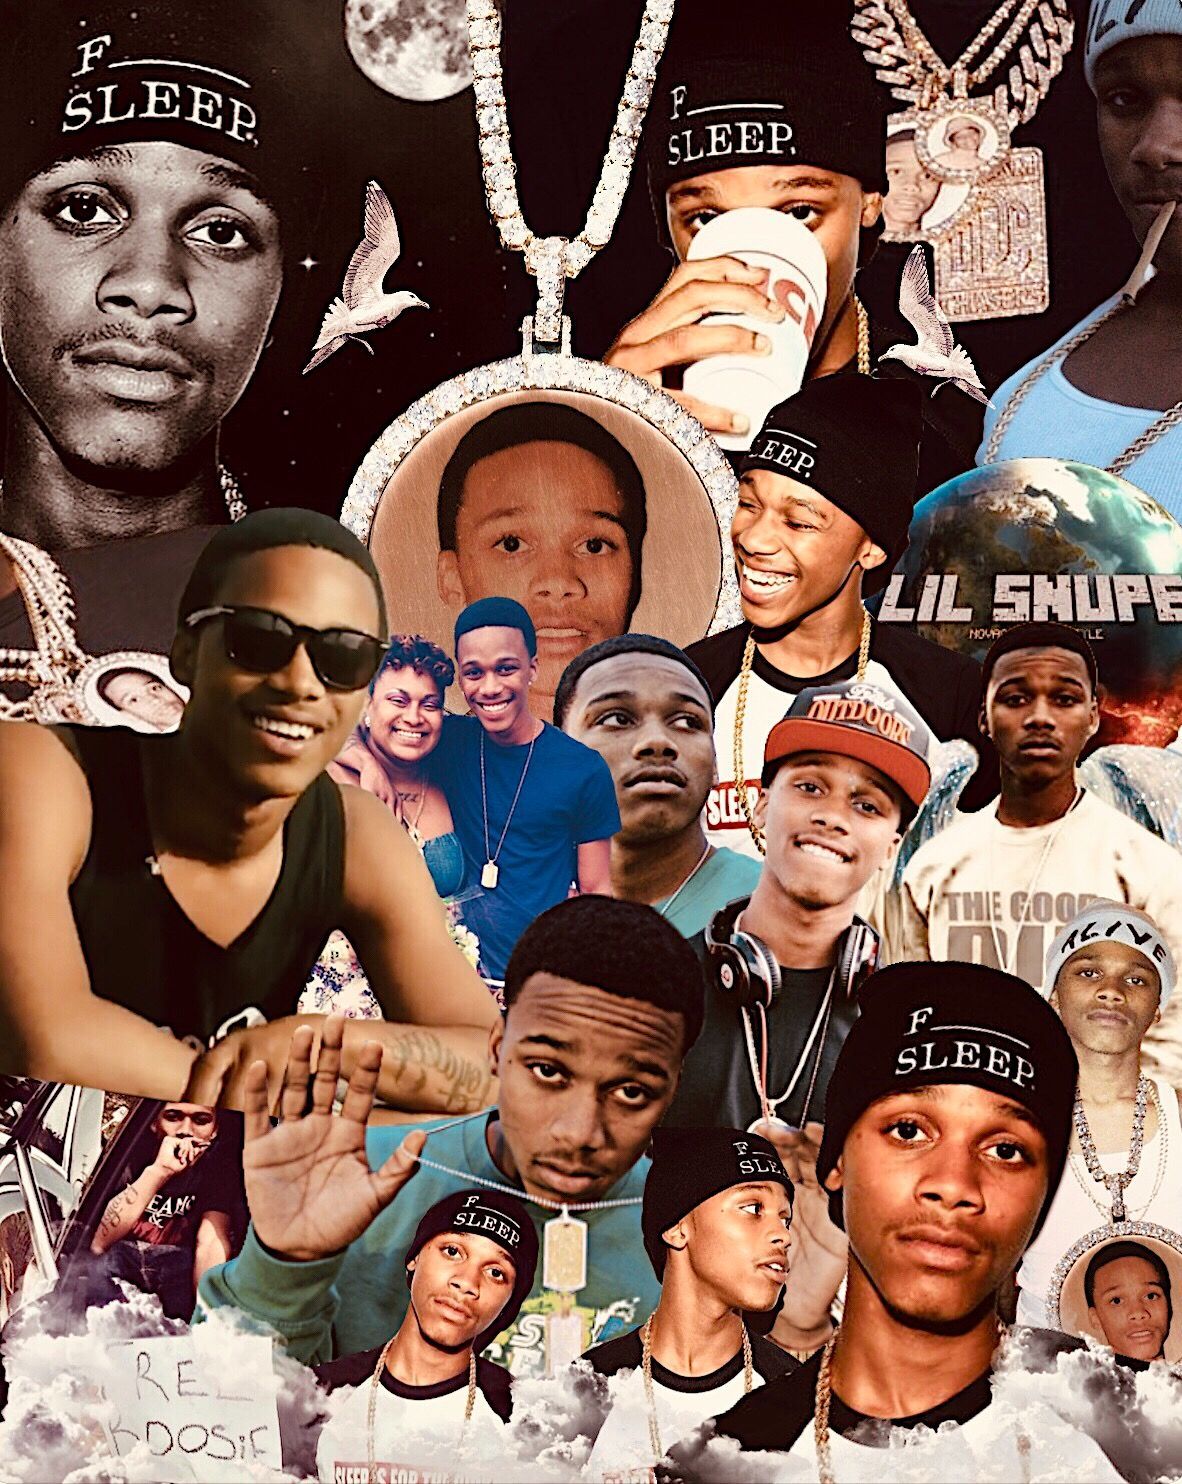 Lil Snupe. Lil snupe, Mixtape cover, Mixtape